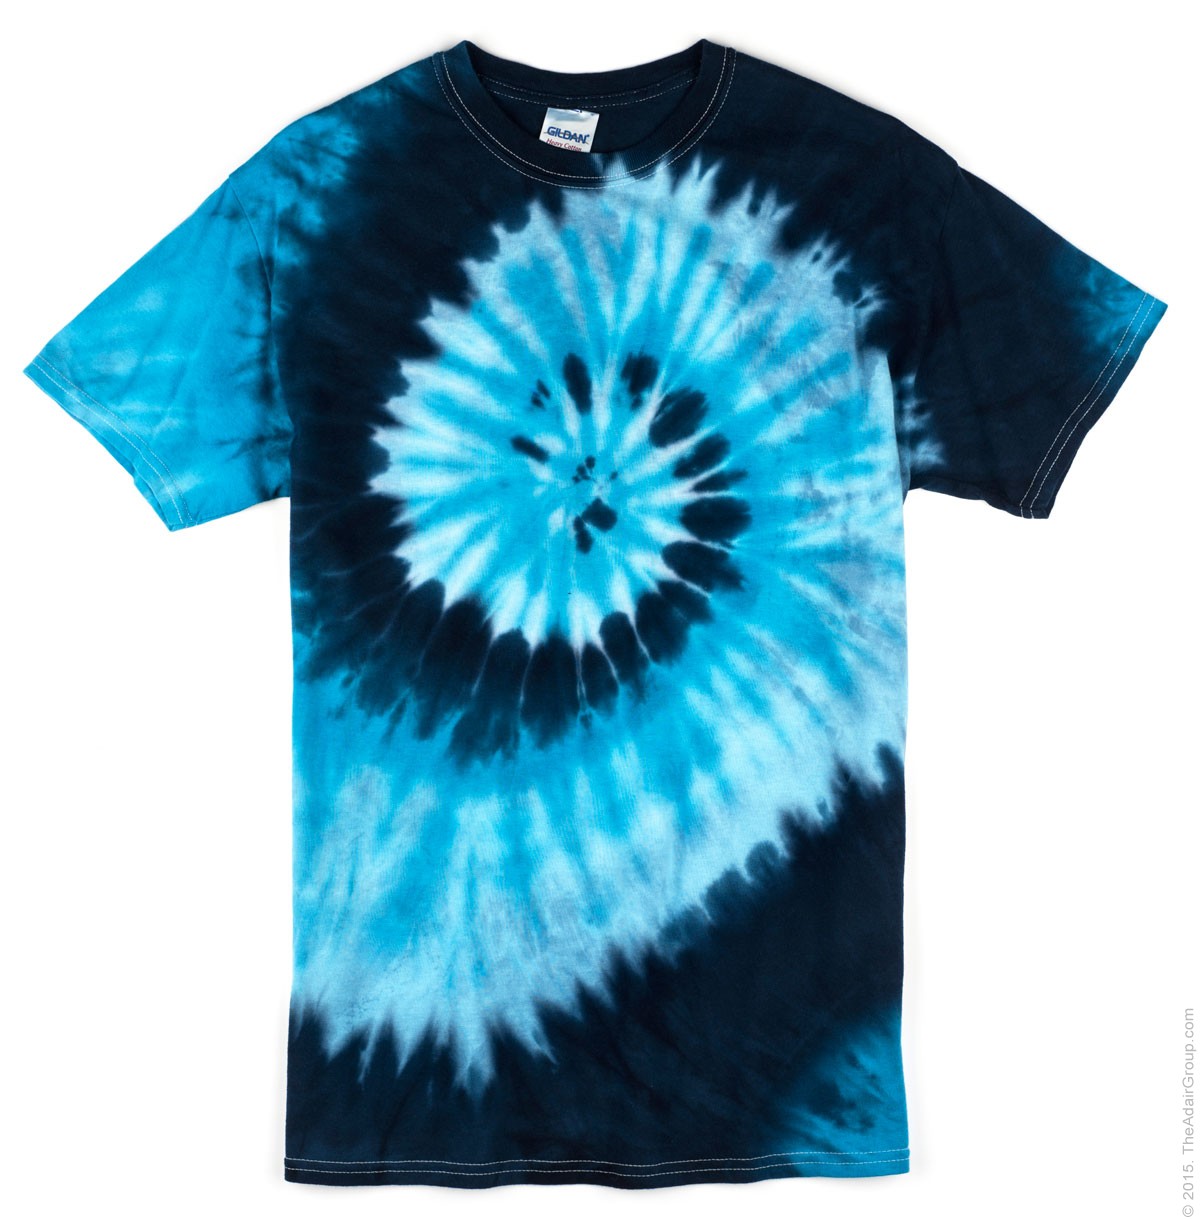 All 90+ Images Picture Of A Tie Dye Shirt Updated